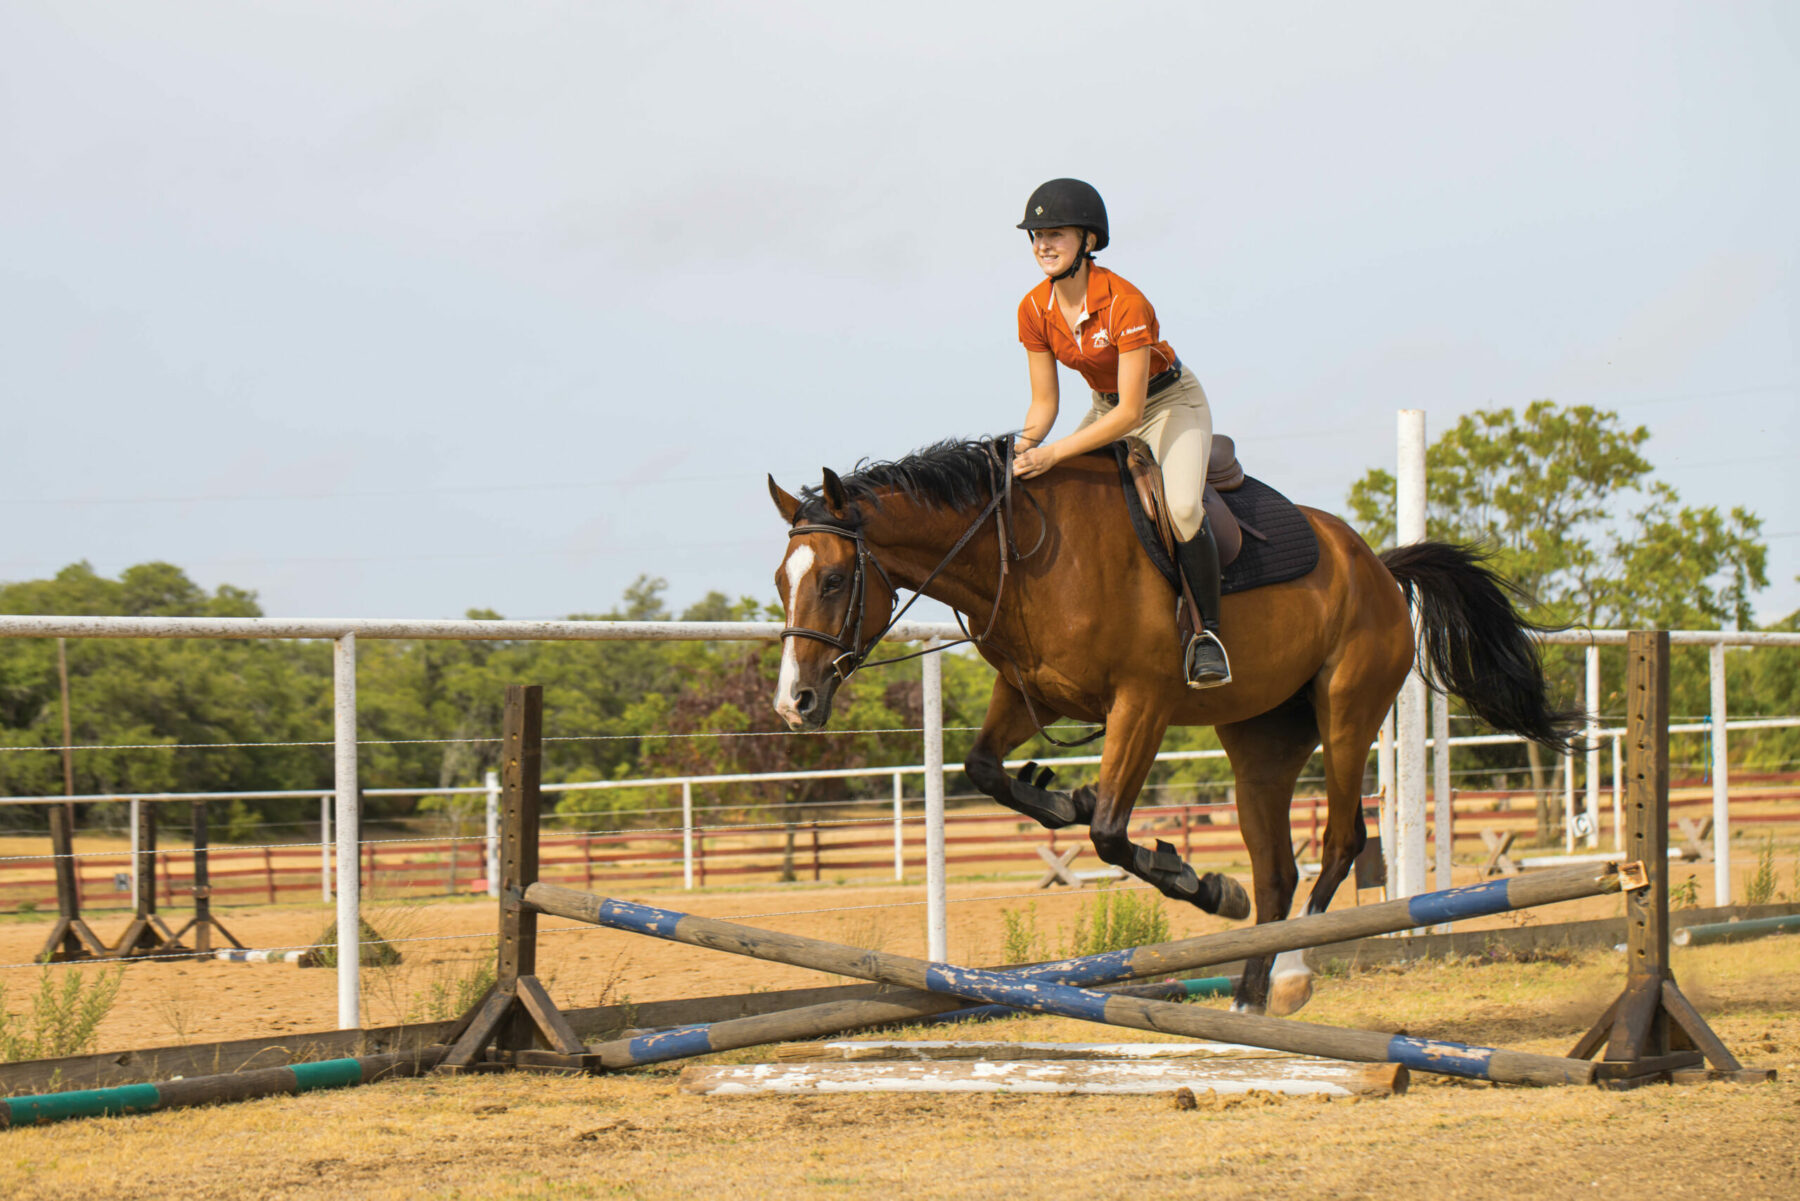 Girl riding horse while jumping.